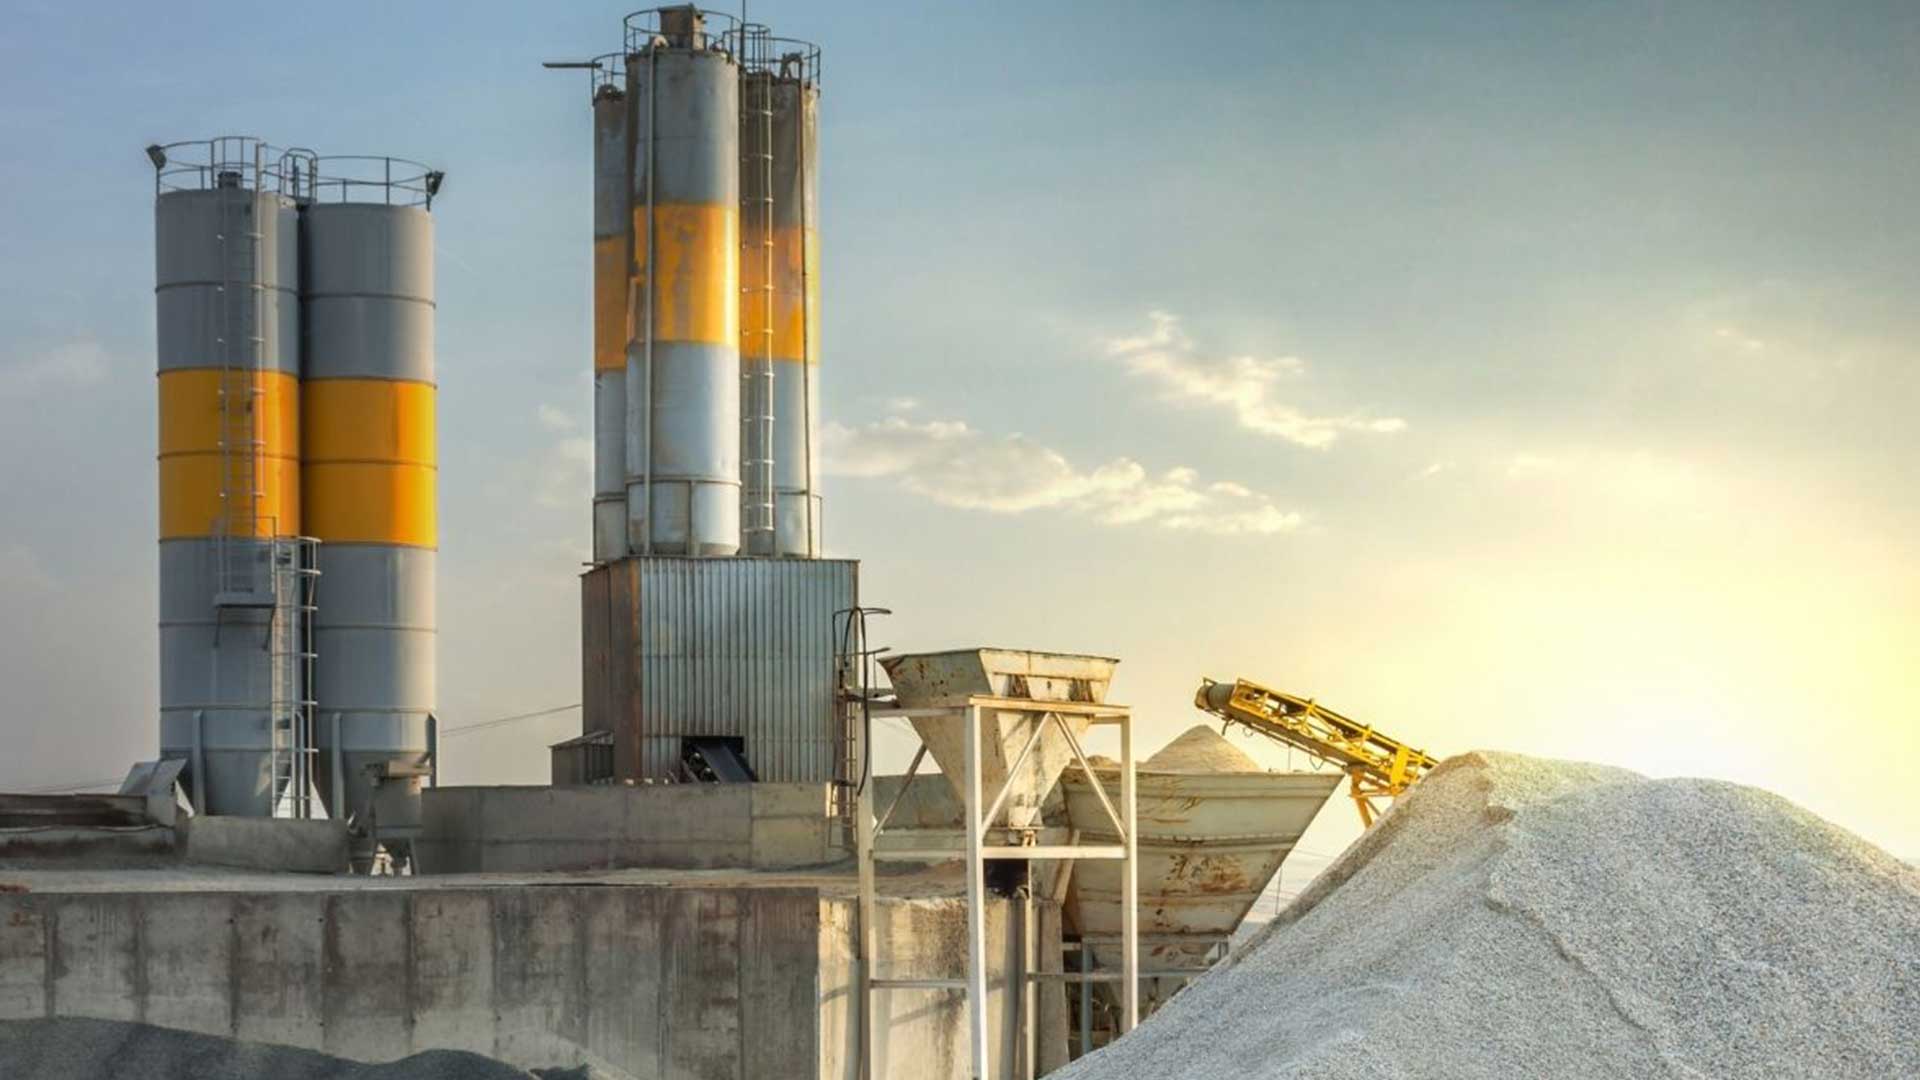 Associate growth at 70% CAGR for a Top Cement Producer